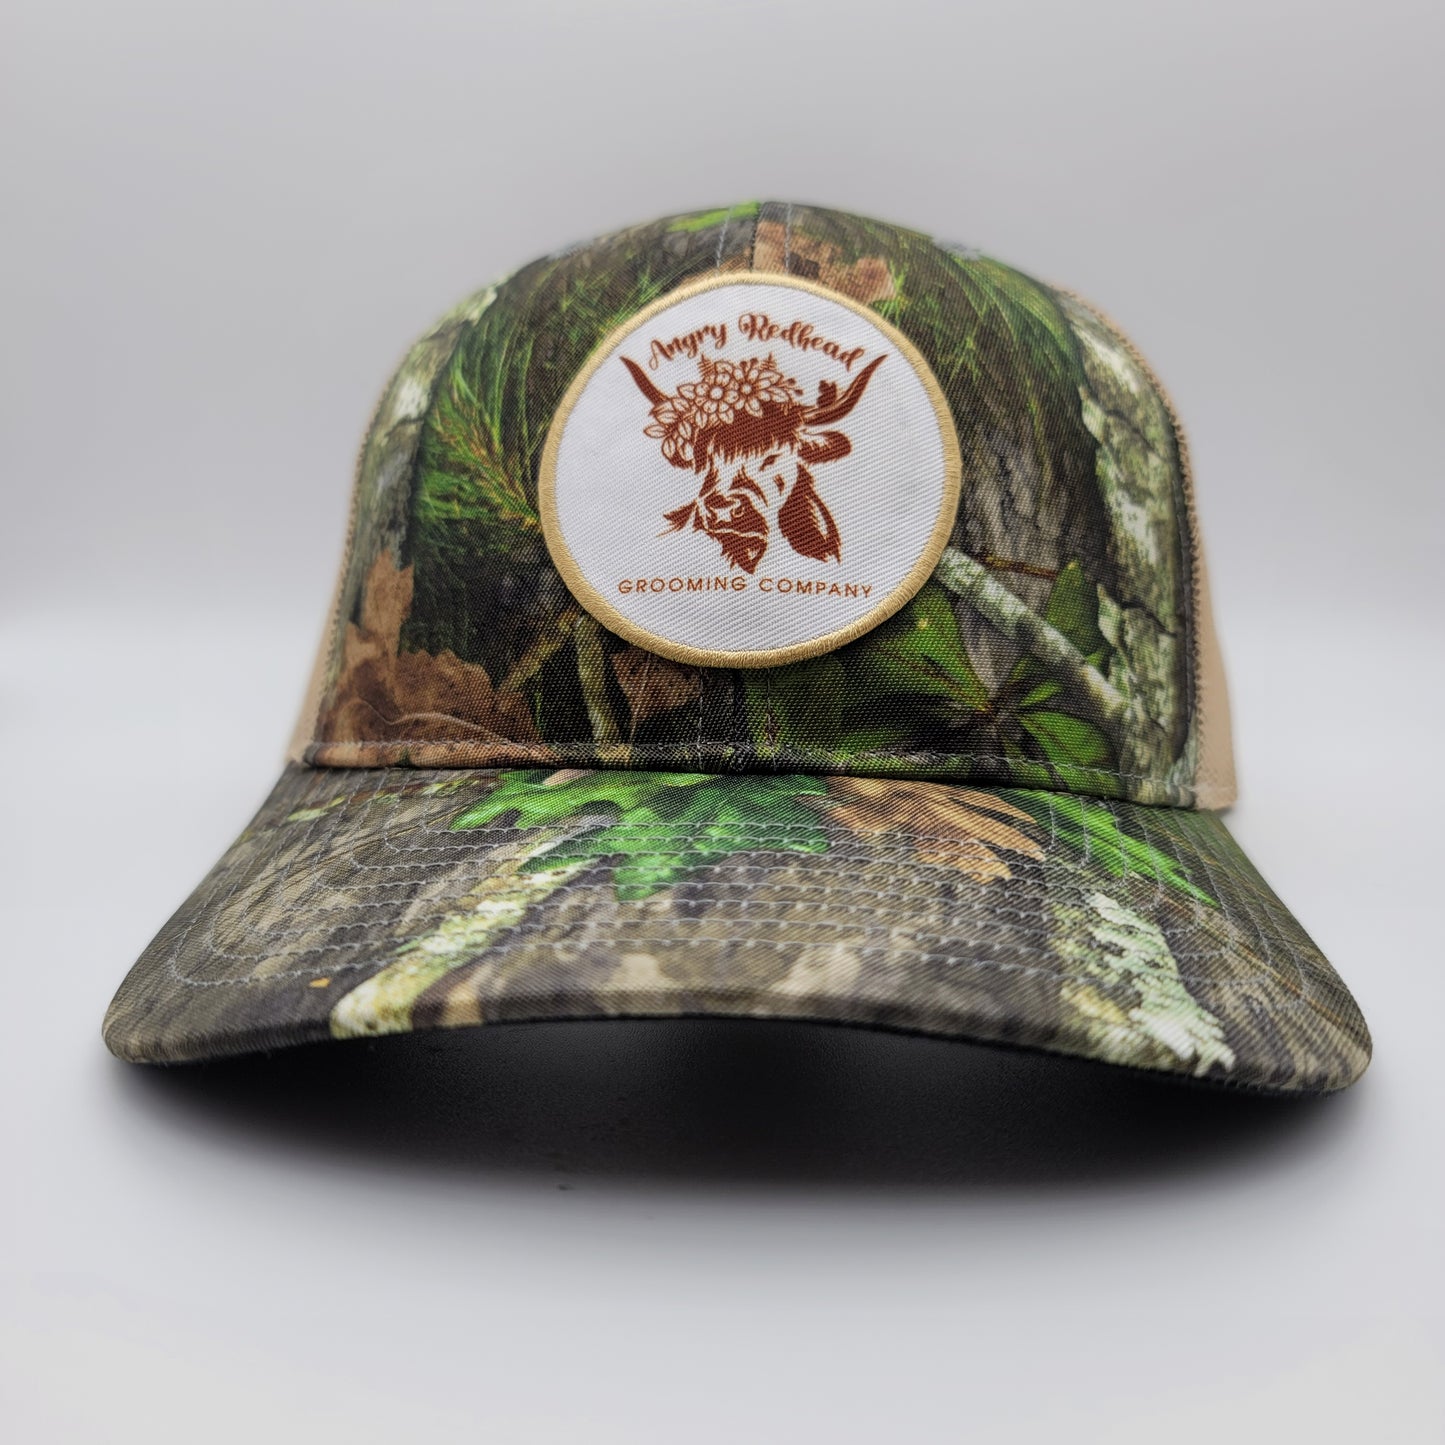 Angry Redhead Grooming Company Trucker Cap by Angry Redhead Grooming Co - angryredheadgrooming.com